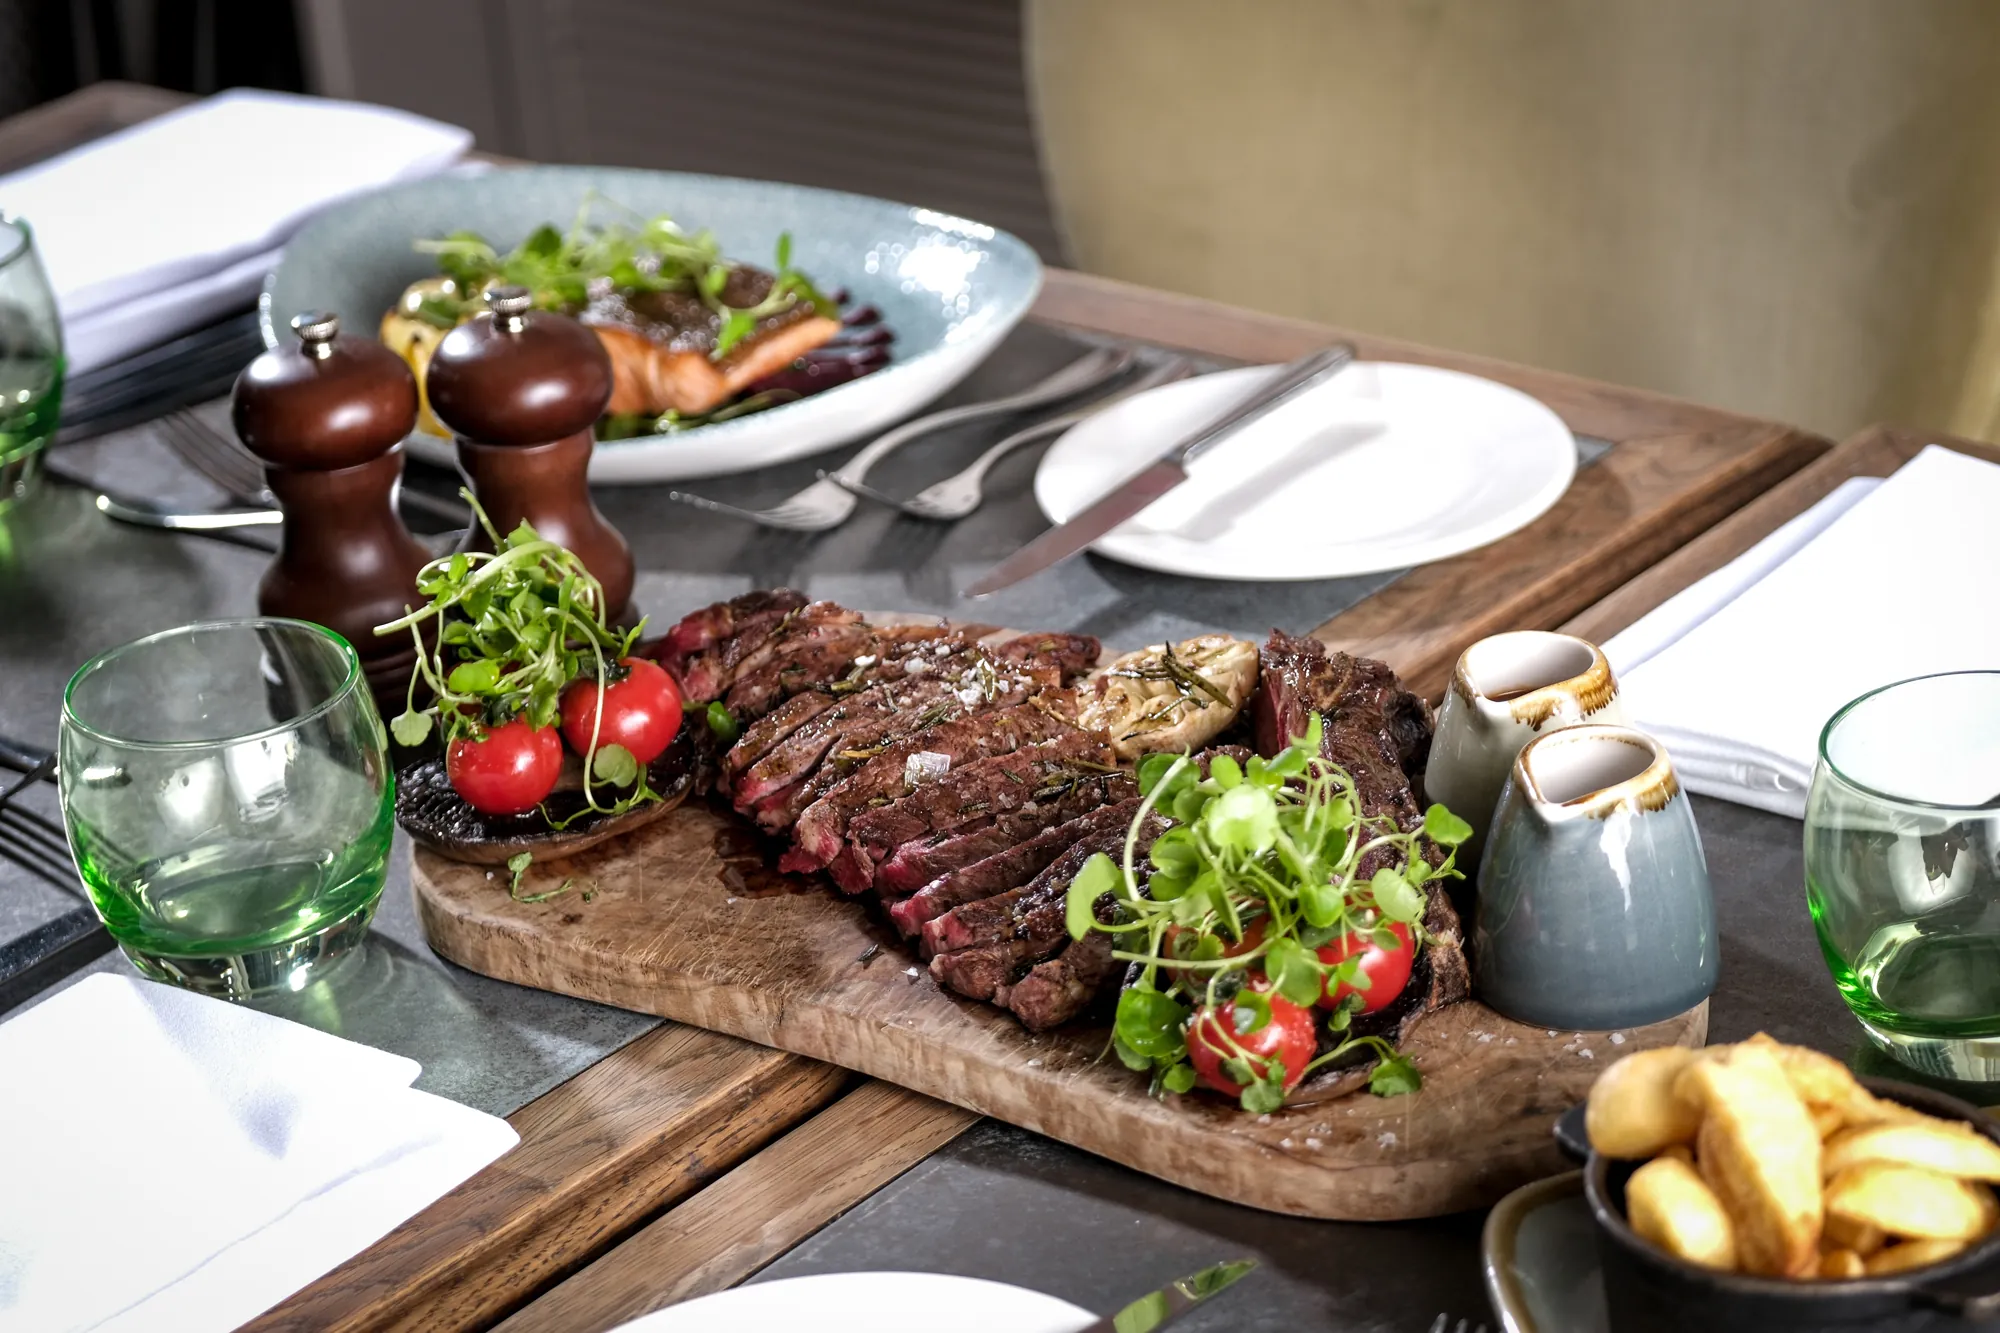 Cote-de-boeuf-sharing-platter-and-sauces